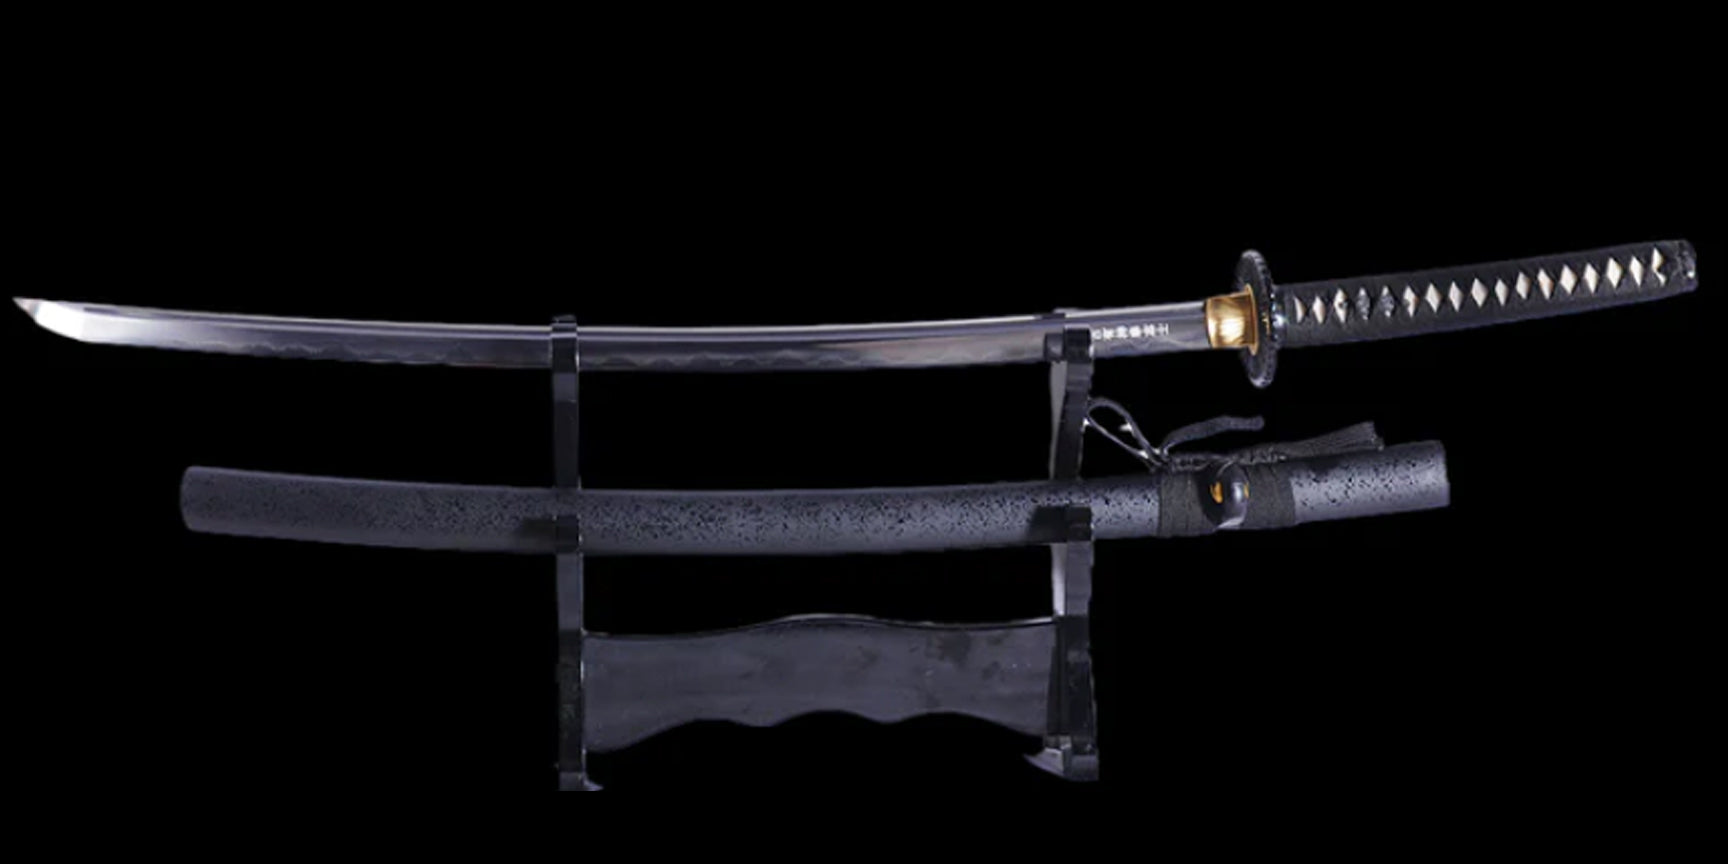 Odachi: A Look at the Long and Legendary Japanese Sword